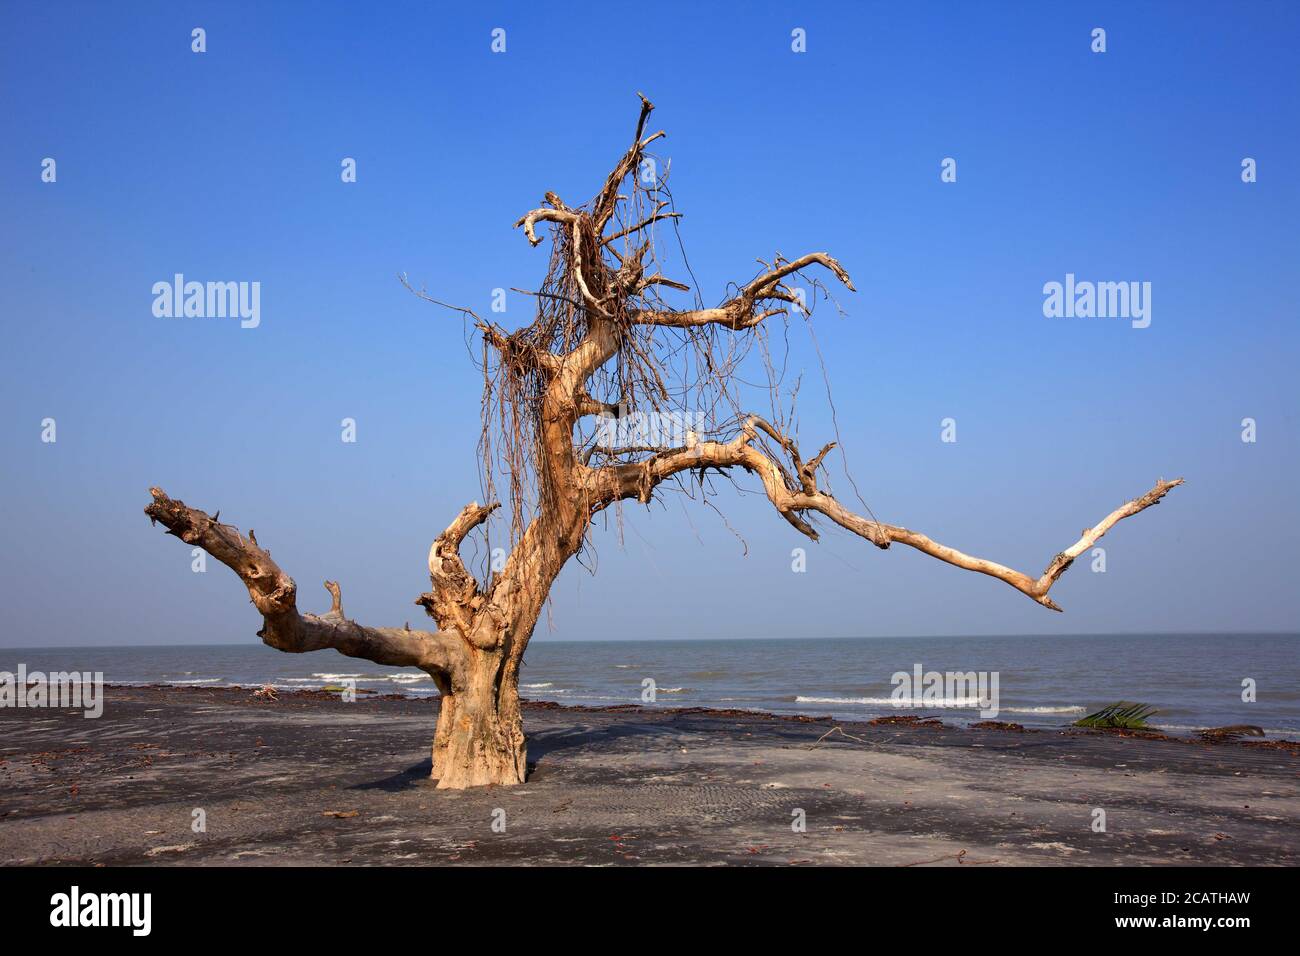 The Sundarbans, aftermath of cyclone Aila, a UNESCO World Heritage Site and a wildlife sanctuary. The largest littoral mangrove forest in the world. Stock Photo